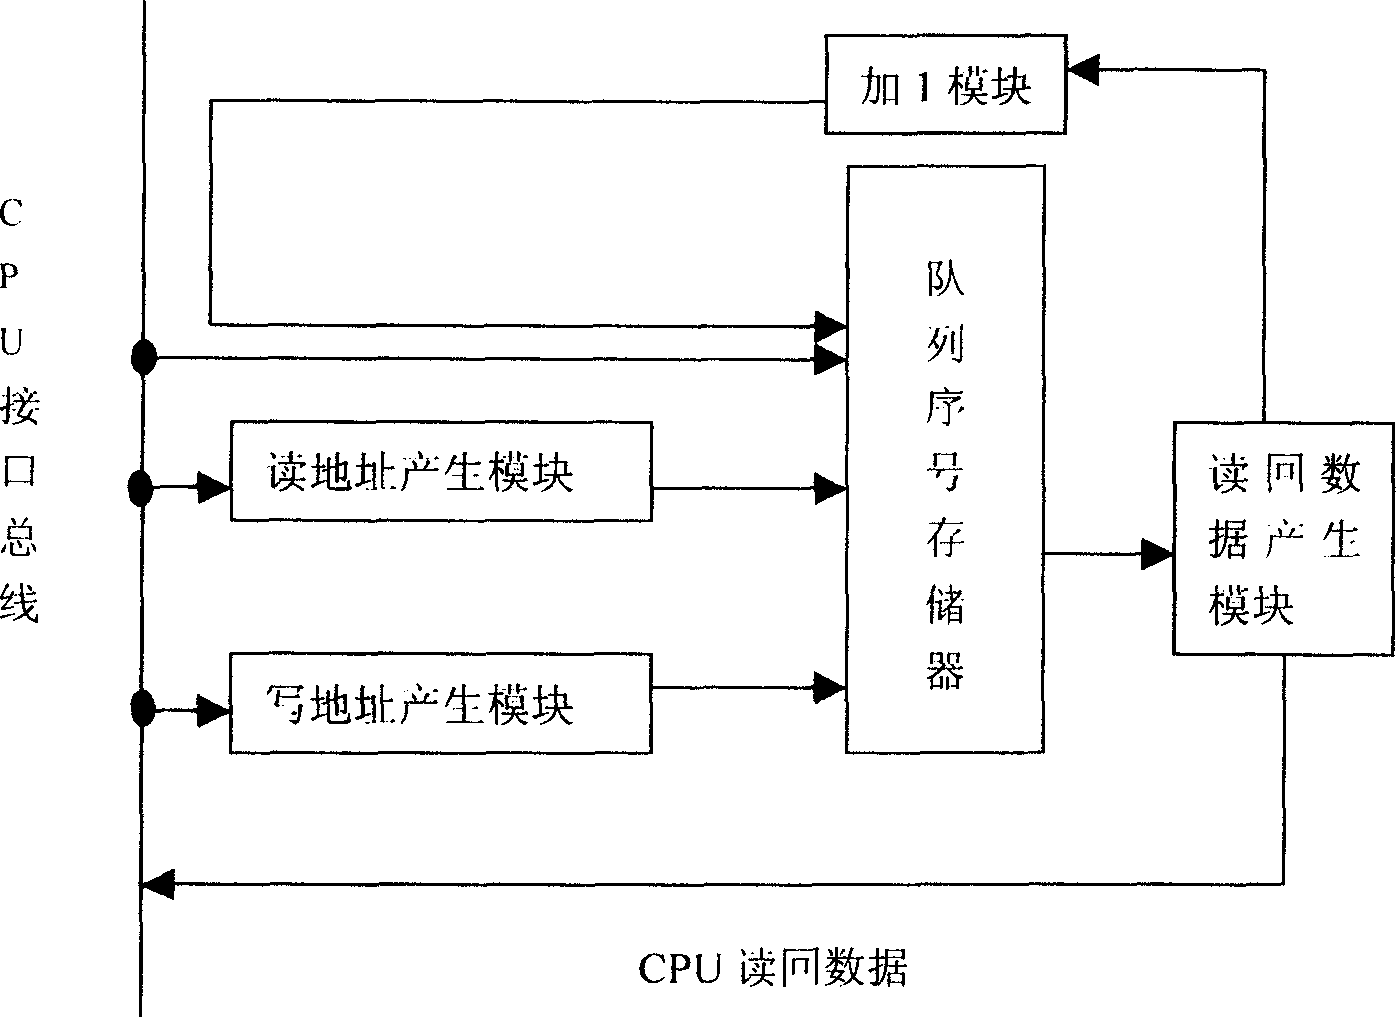 Multi-kernel parallel first-in first-out queue processing system and method